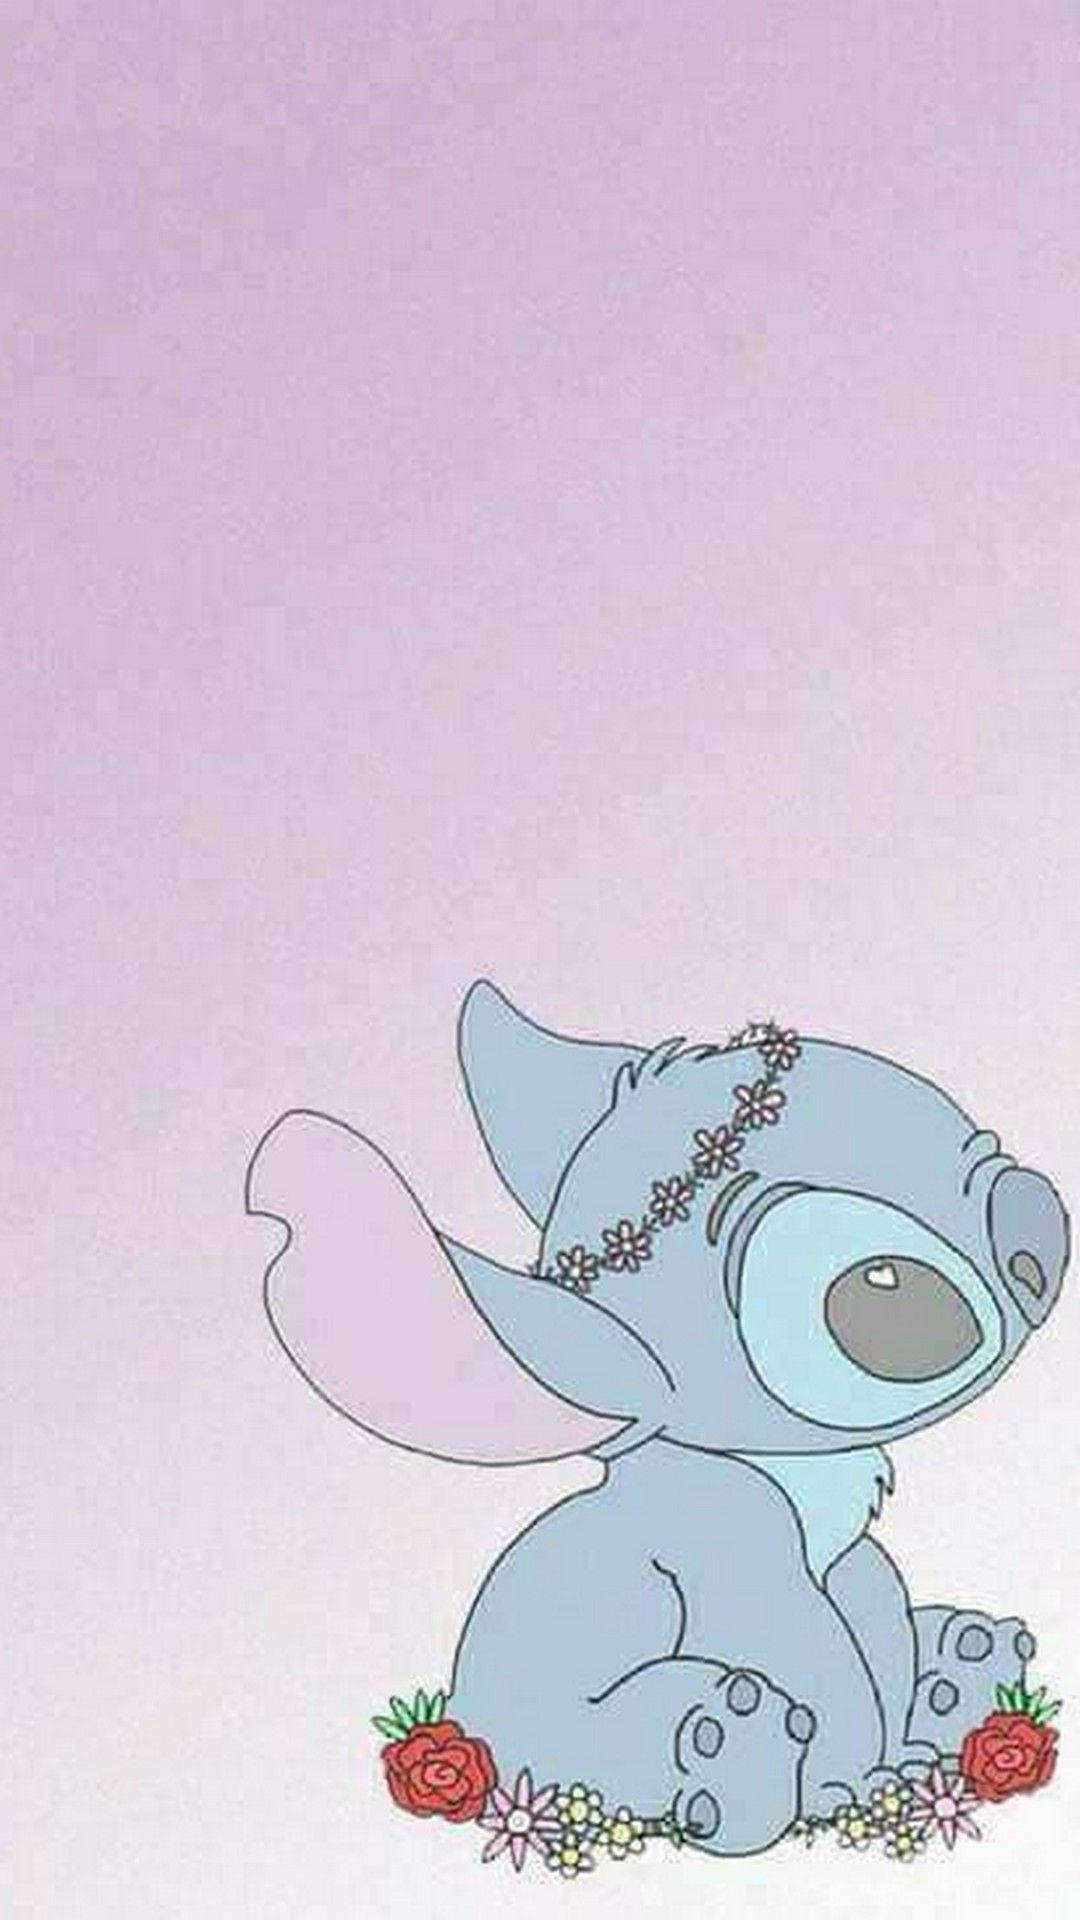 Stitch with crown of flowers wallpaper.